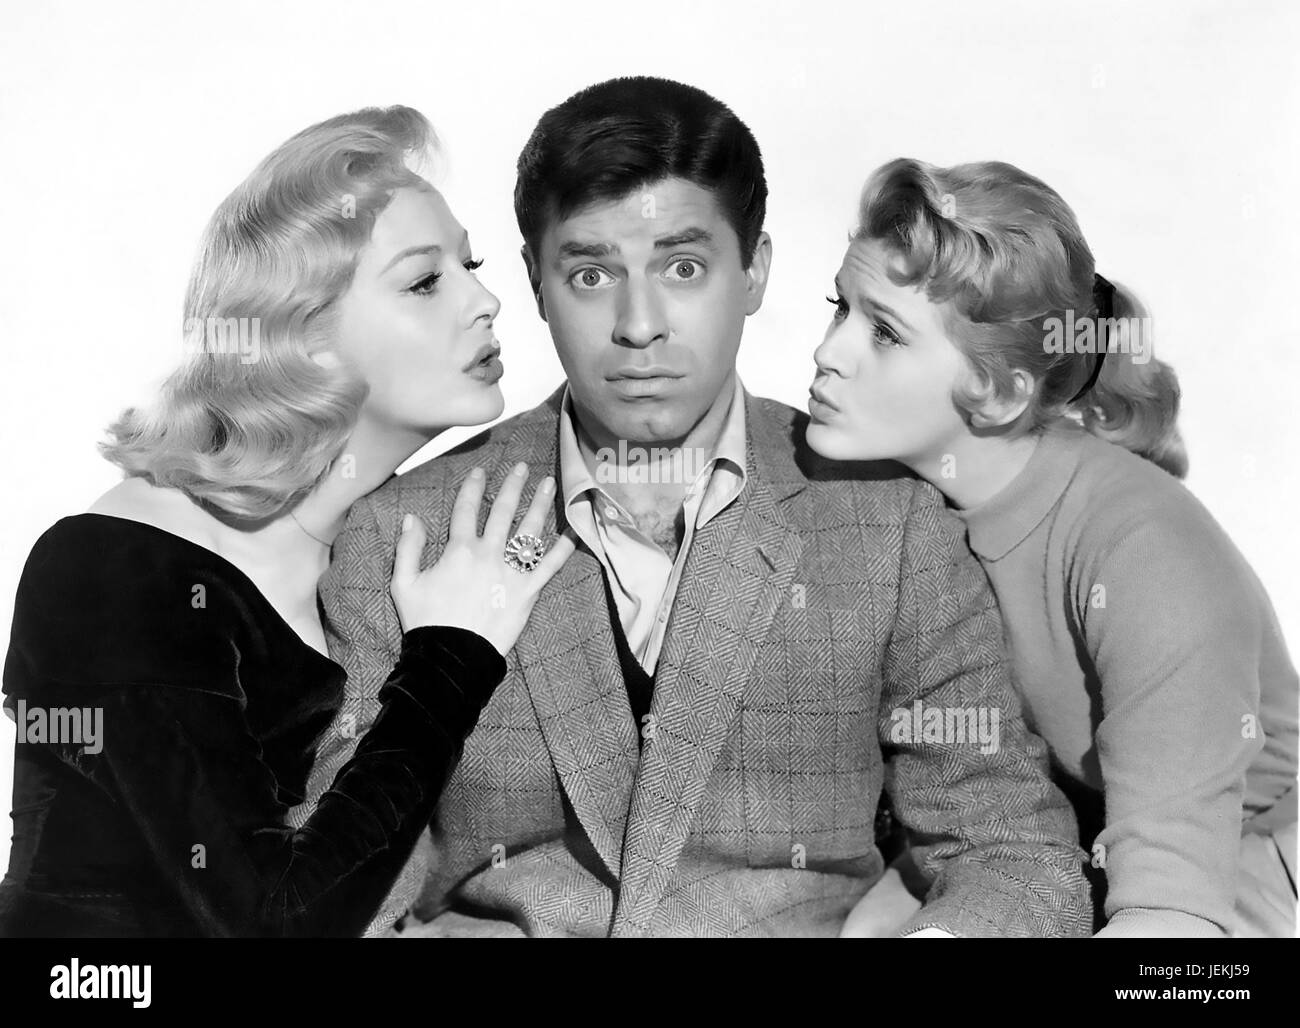 ROCK-A-BYE BABY 1958 Paramount Pictures film con da sinistra: Marilyn Maxwell, Jerry Lewis , Connie Stevens Foto Stock